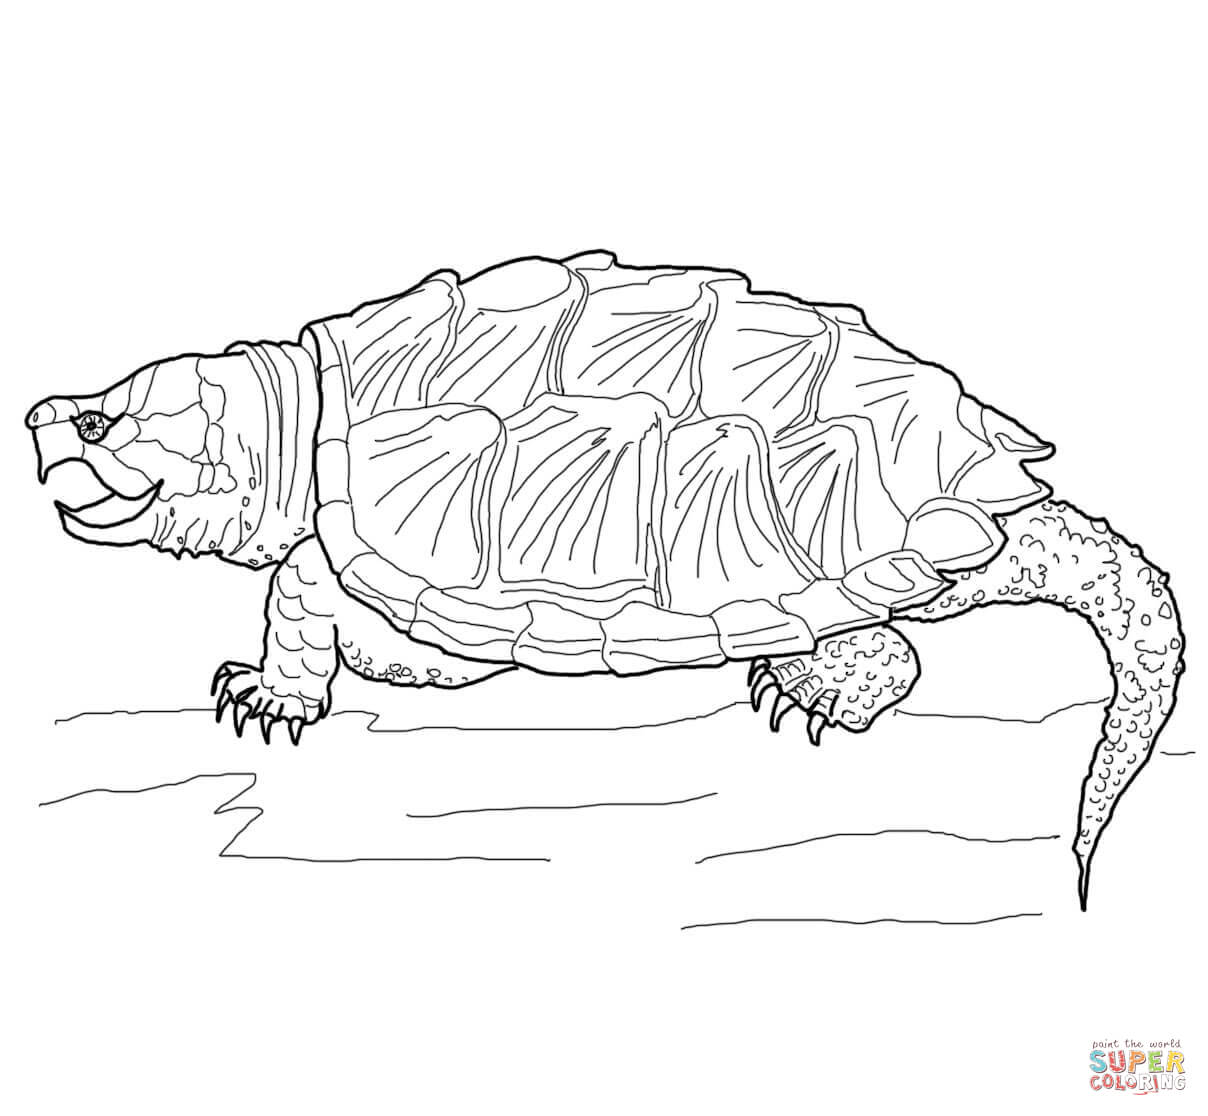 Alligator Snapping Turtle clipart #19, Download drawings